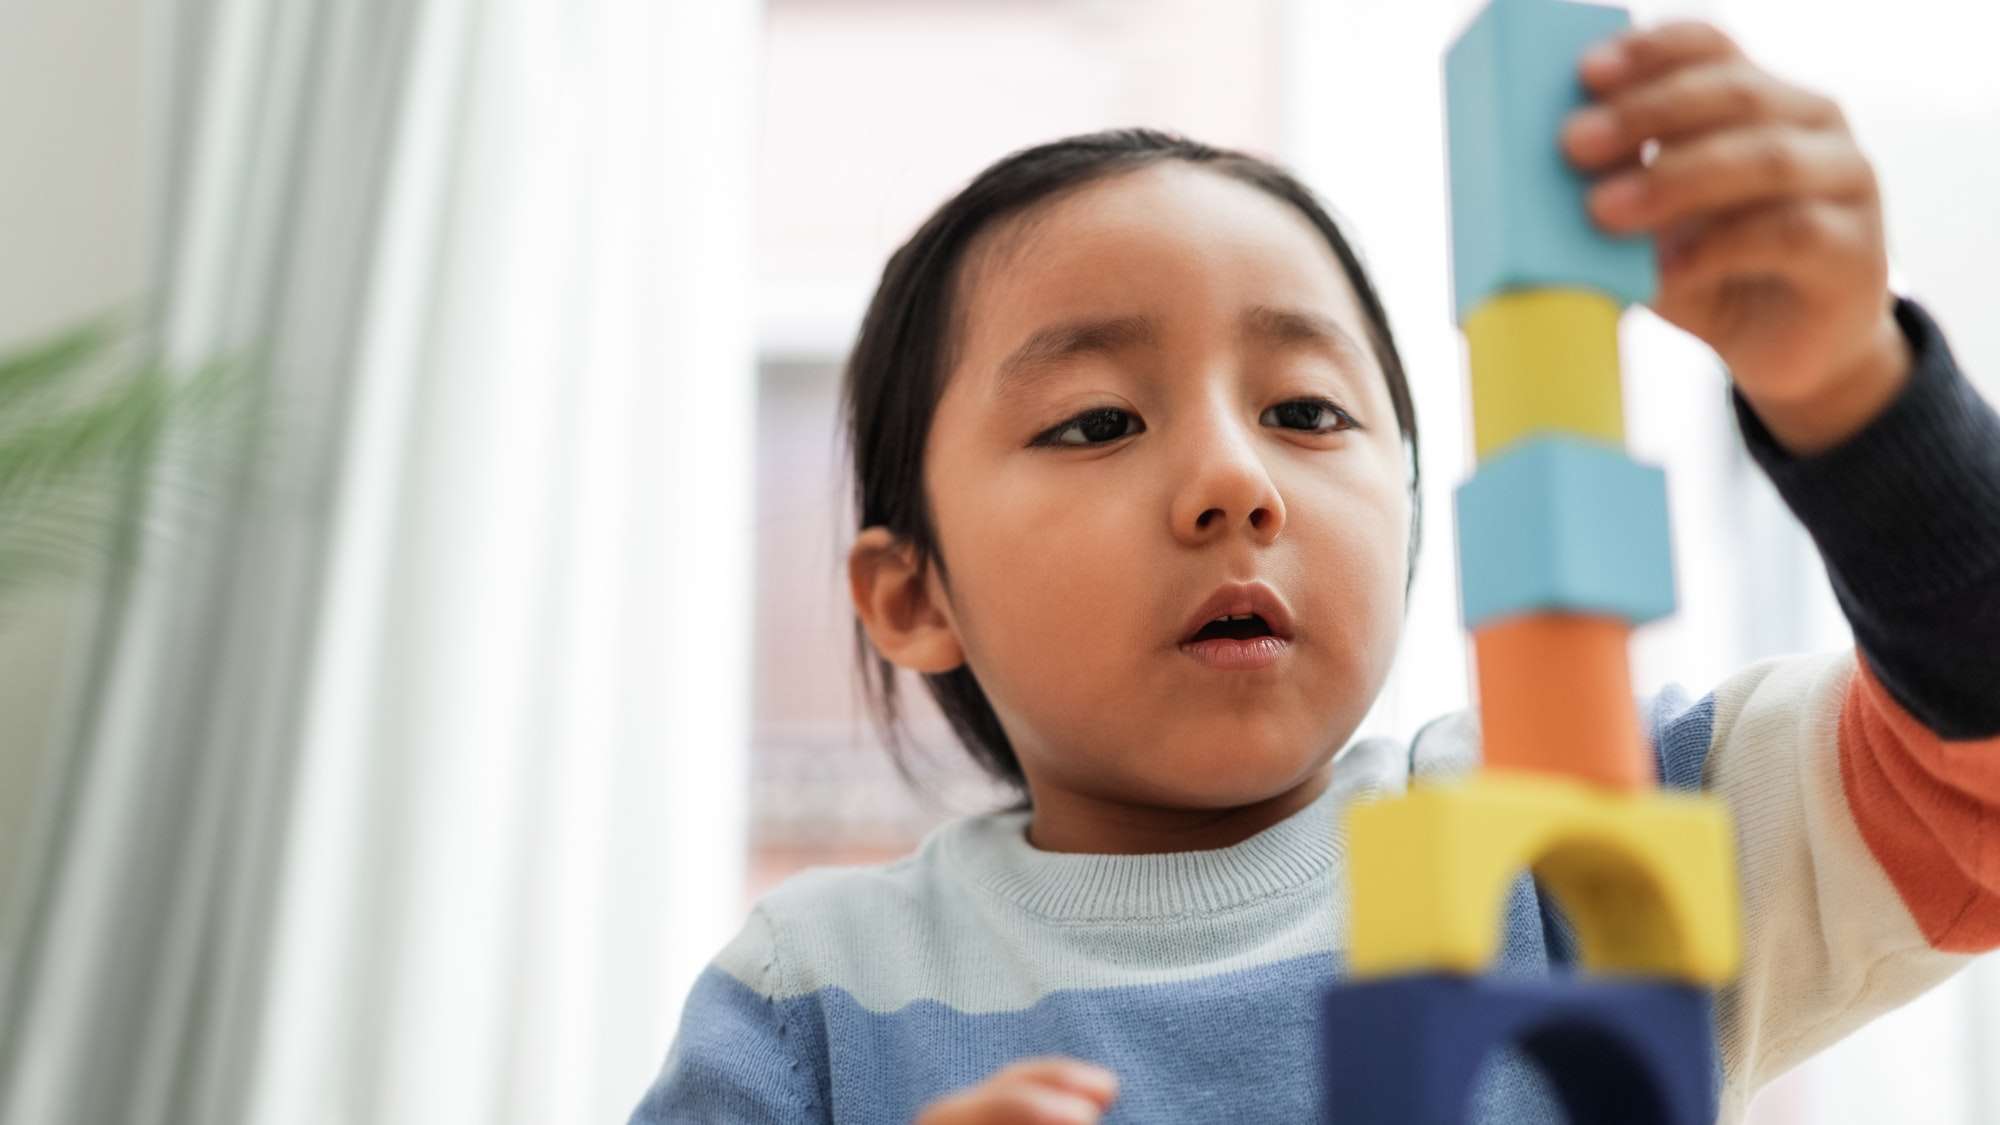 Young asian kid playing with color blocks at home - Kindergarten educational games